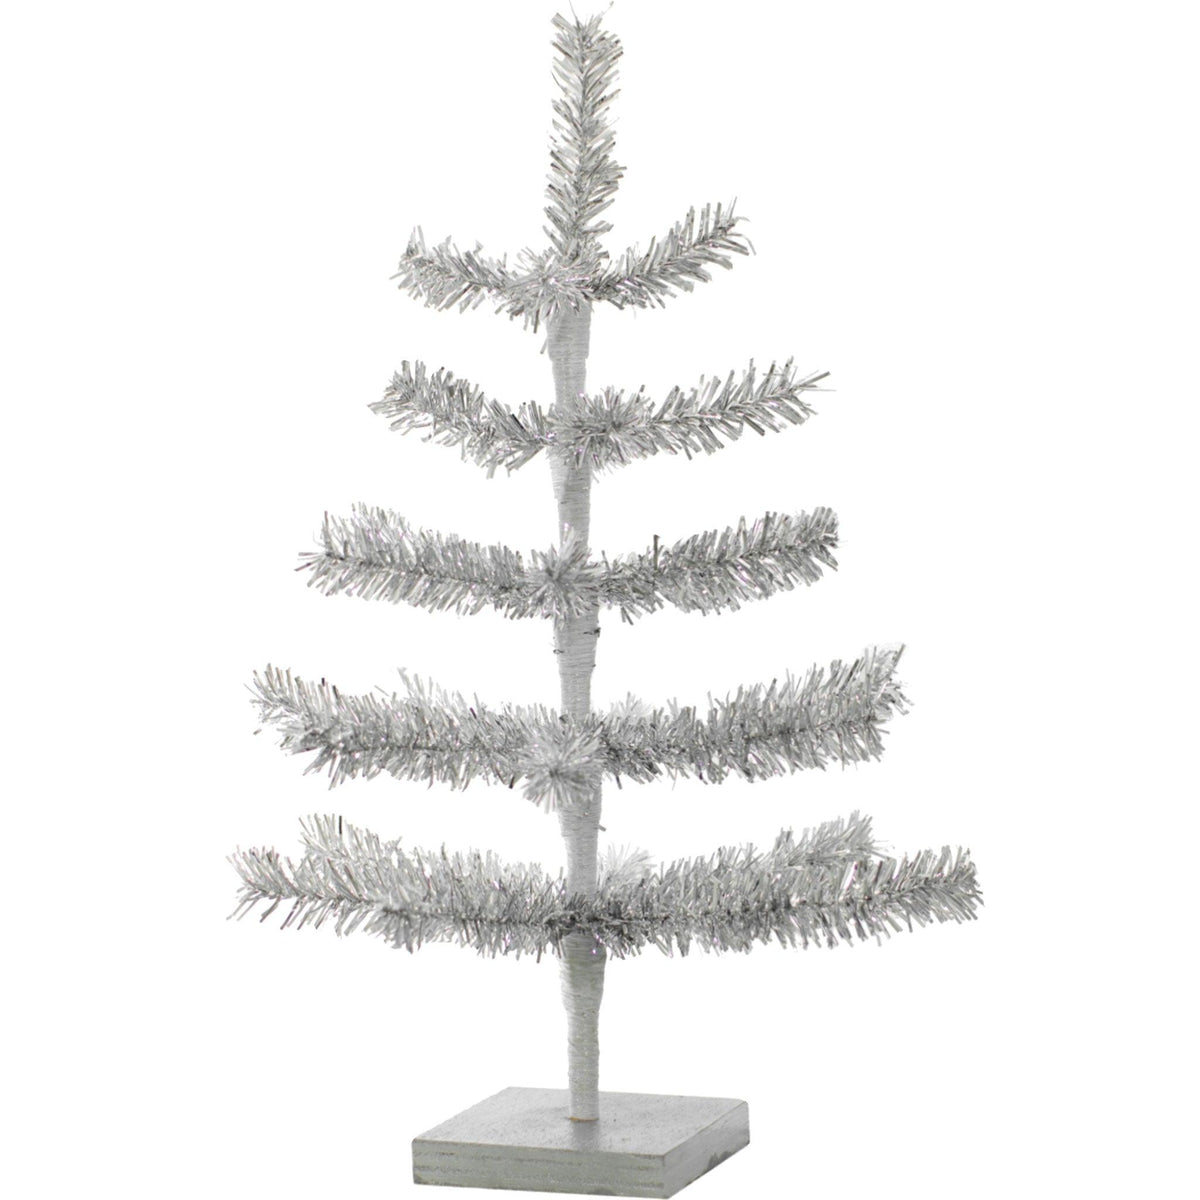 Lee Display's Original Silver Tinsel Christmas Trees are now available with 1in thin diameter branches.  On sale at leedisplay.com